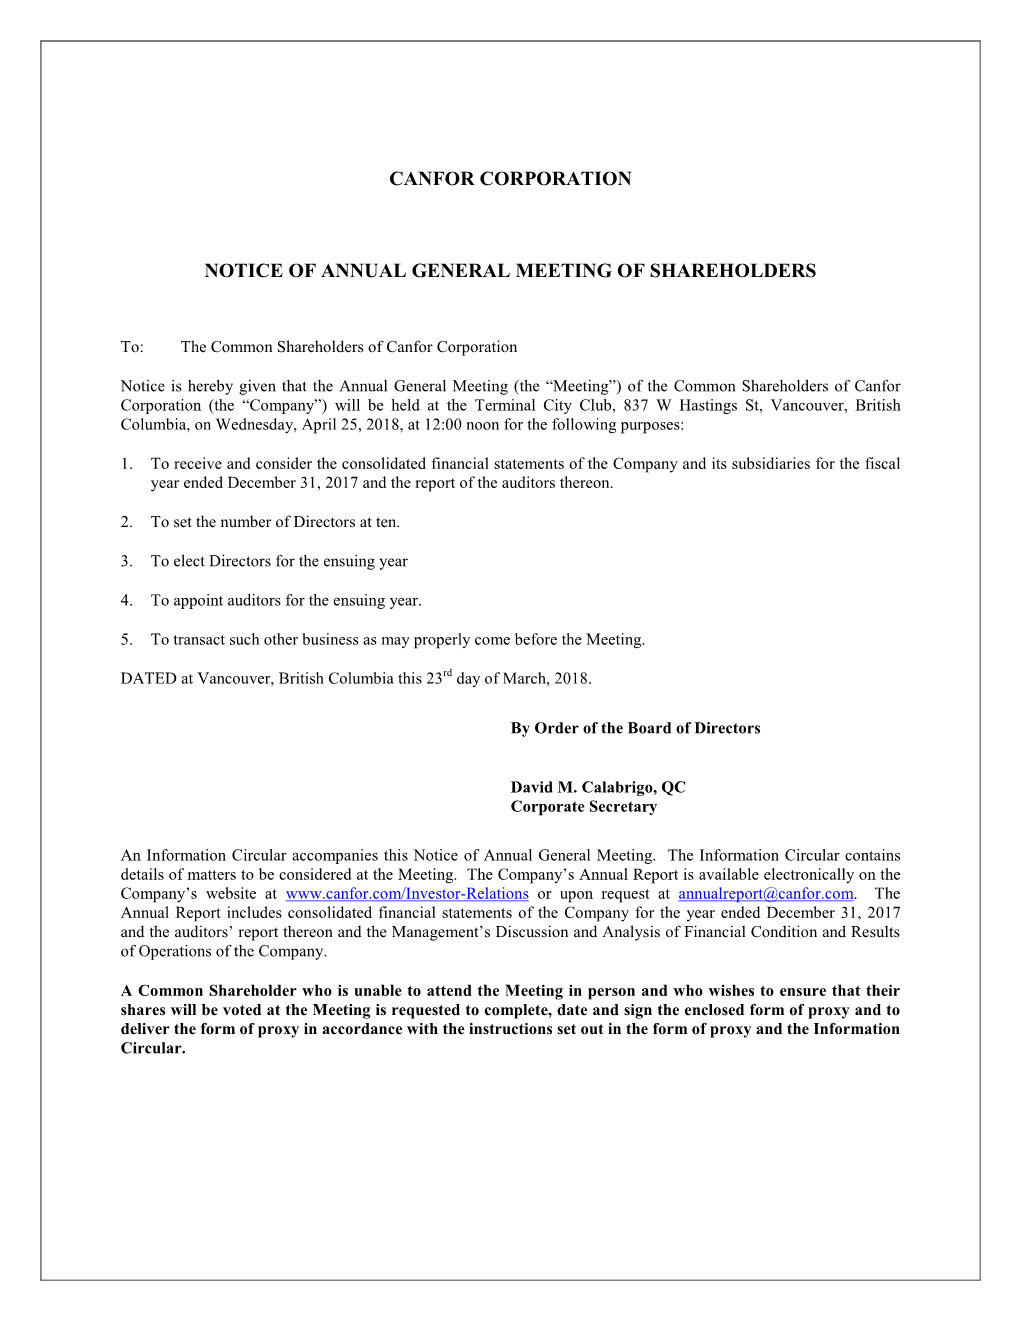 Canfor Corporation Notice of Annual General Meeting